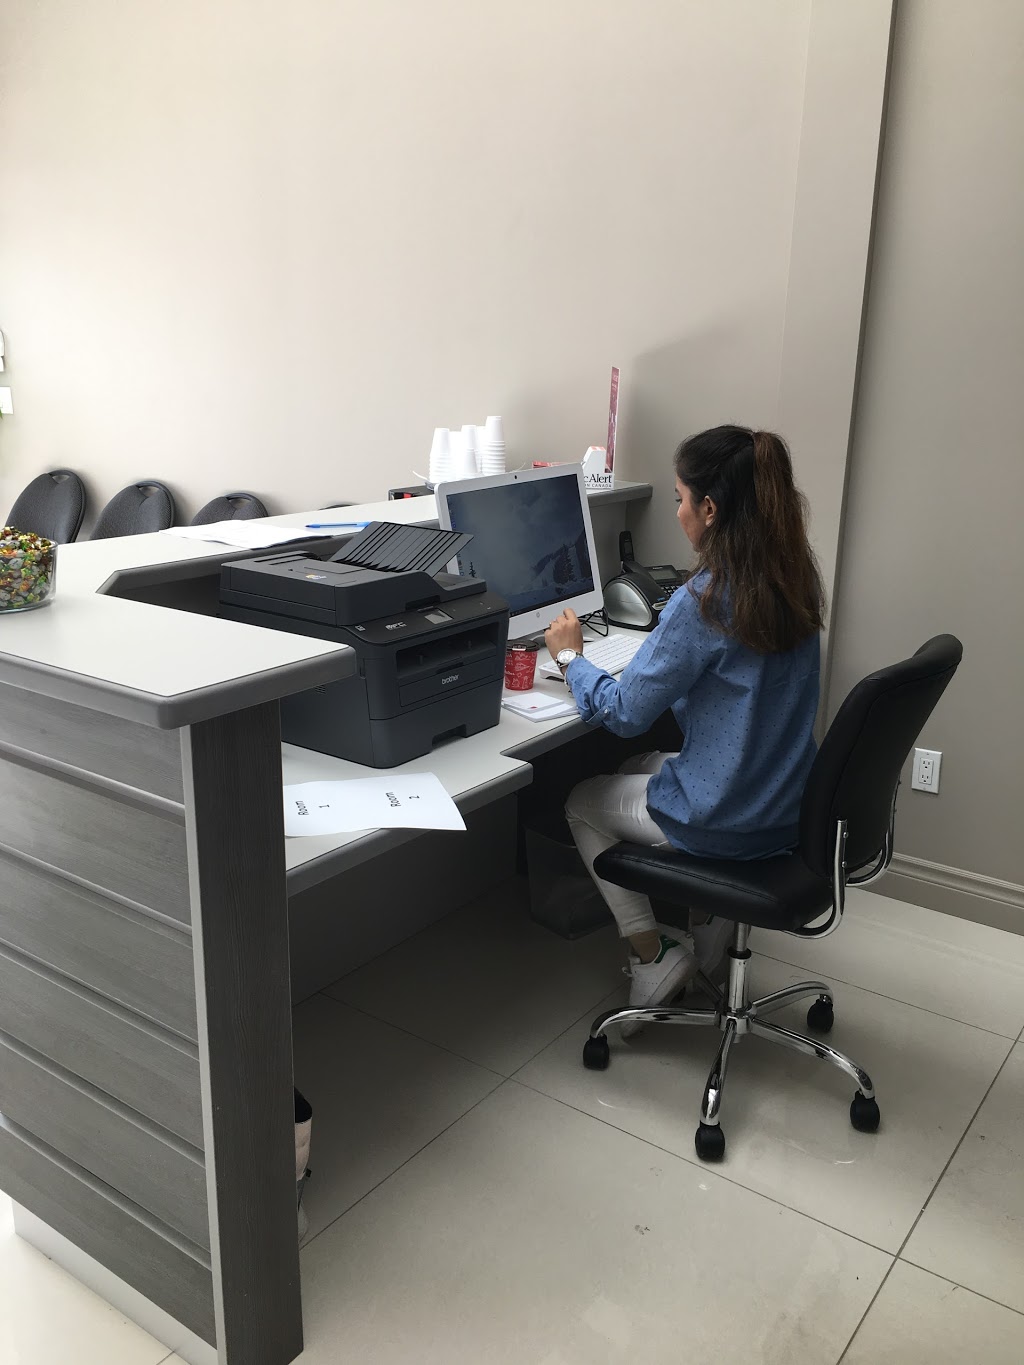 Ariana Walk In clinic & Family Care | health | 751 Don Mills Rd, North York, ON M3C 1S3, Canada | 6473503030 OR +1 647-350-3030